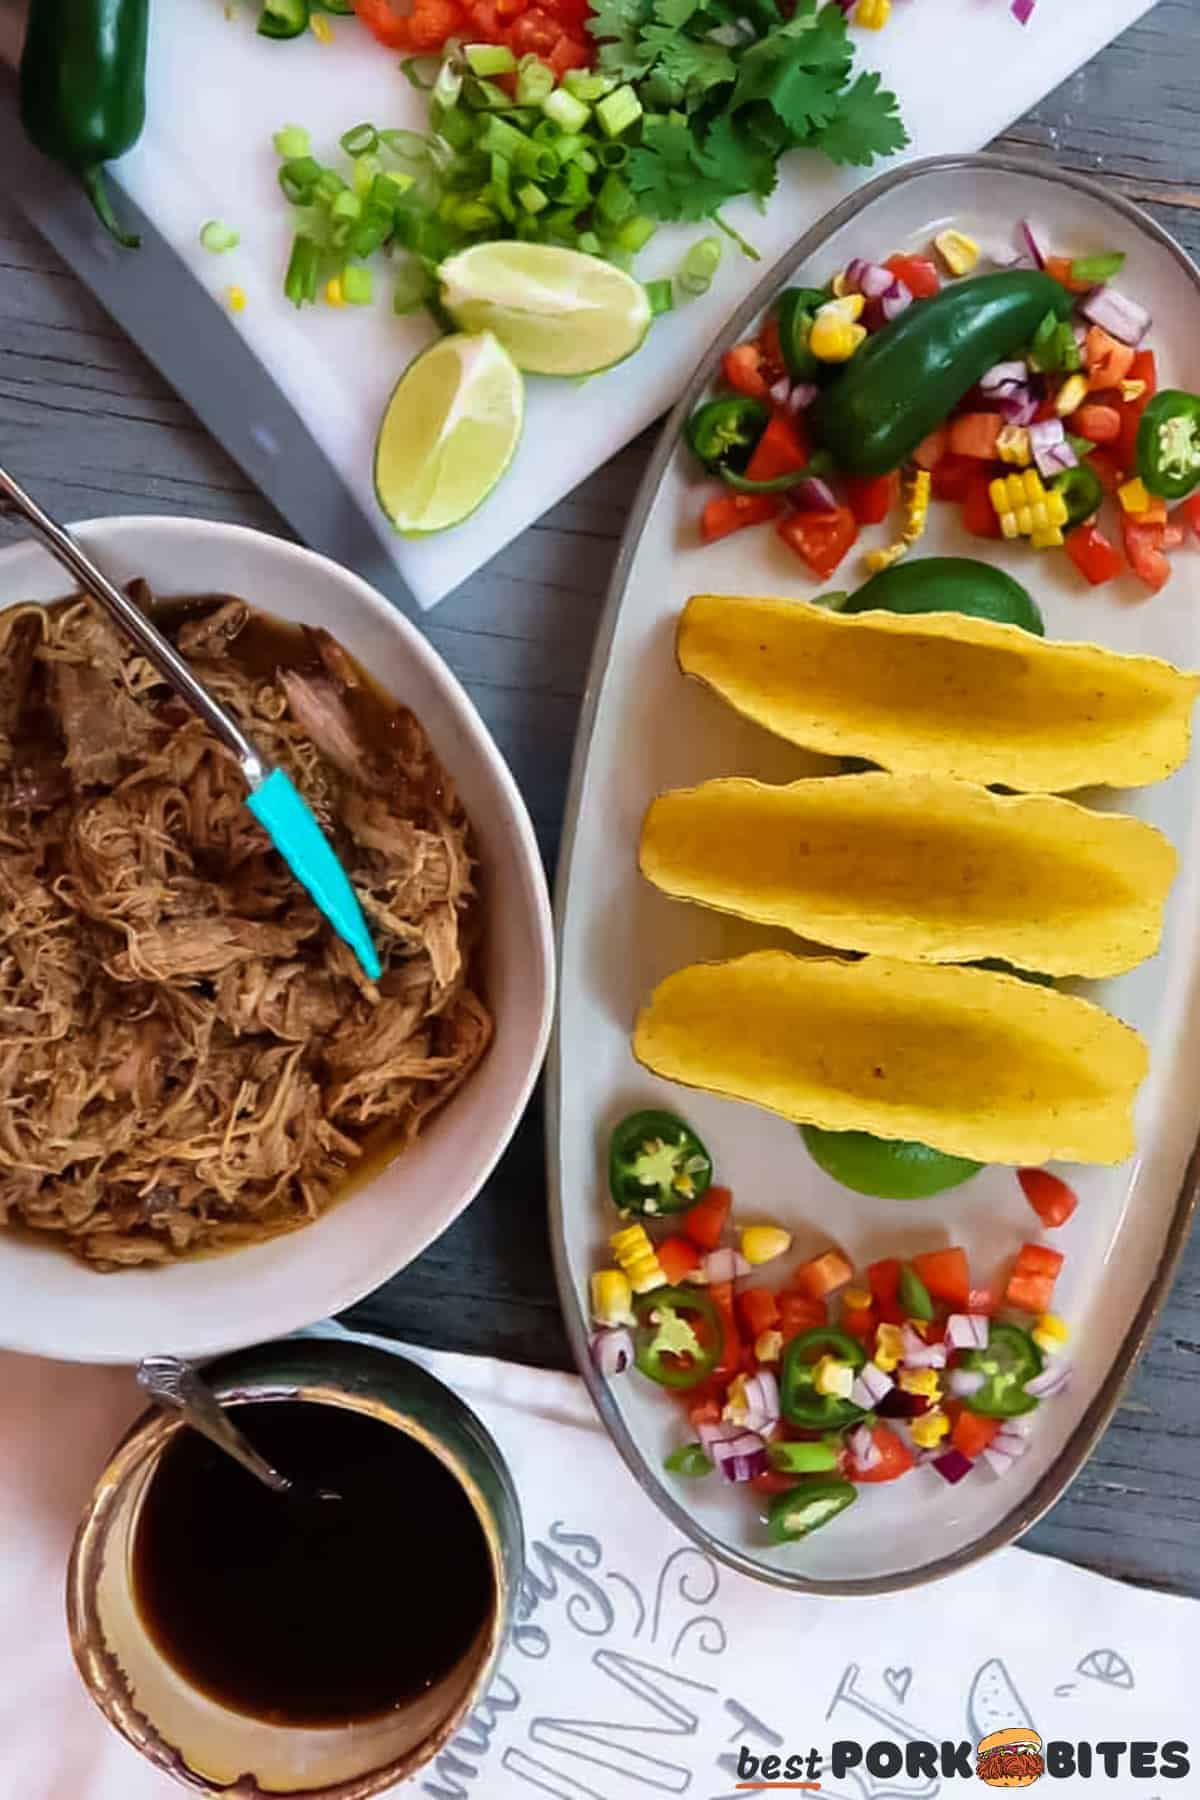 a plate of taco shells with sliced toppings next to a cutting board of toppings, a bowl of pulled pork and a dish of sauce